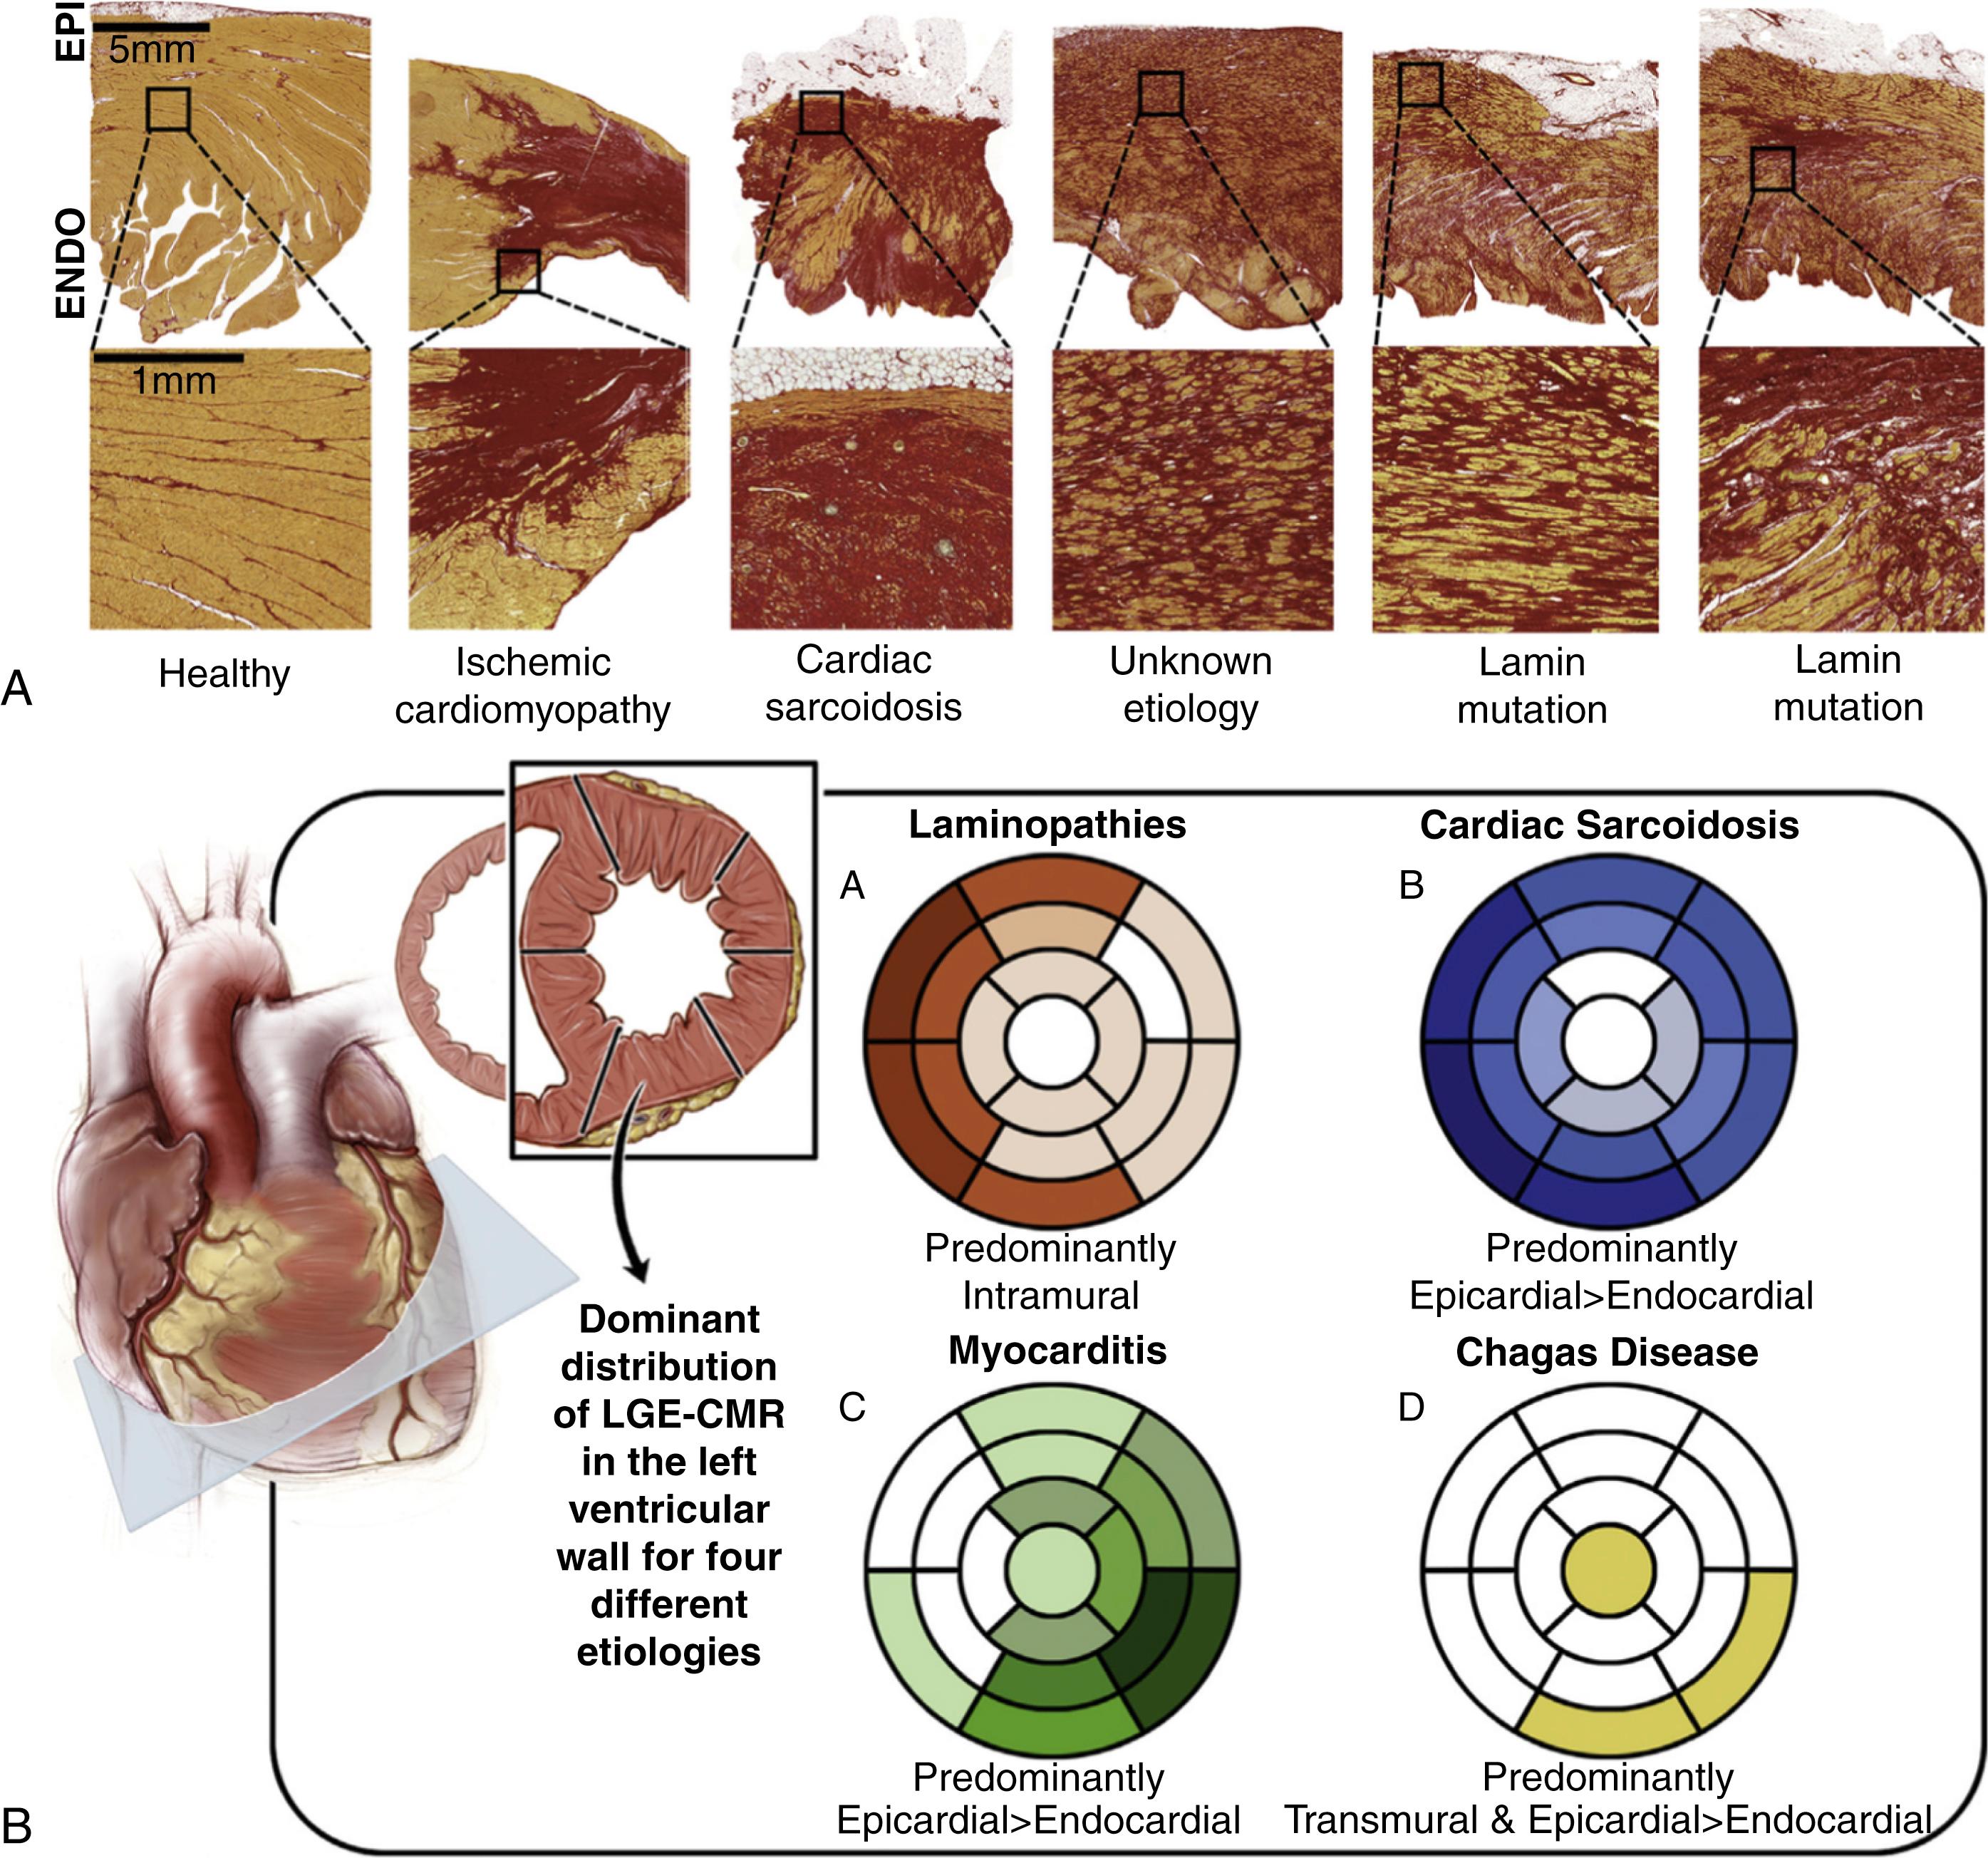 Fig. 46.2, Histopathology of different cardiomyopathy etiologies and representation of dominant substrate locations.